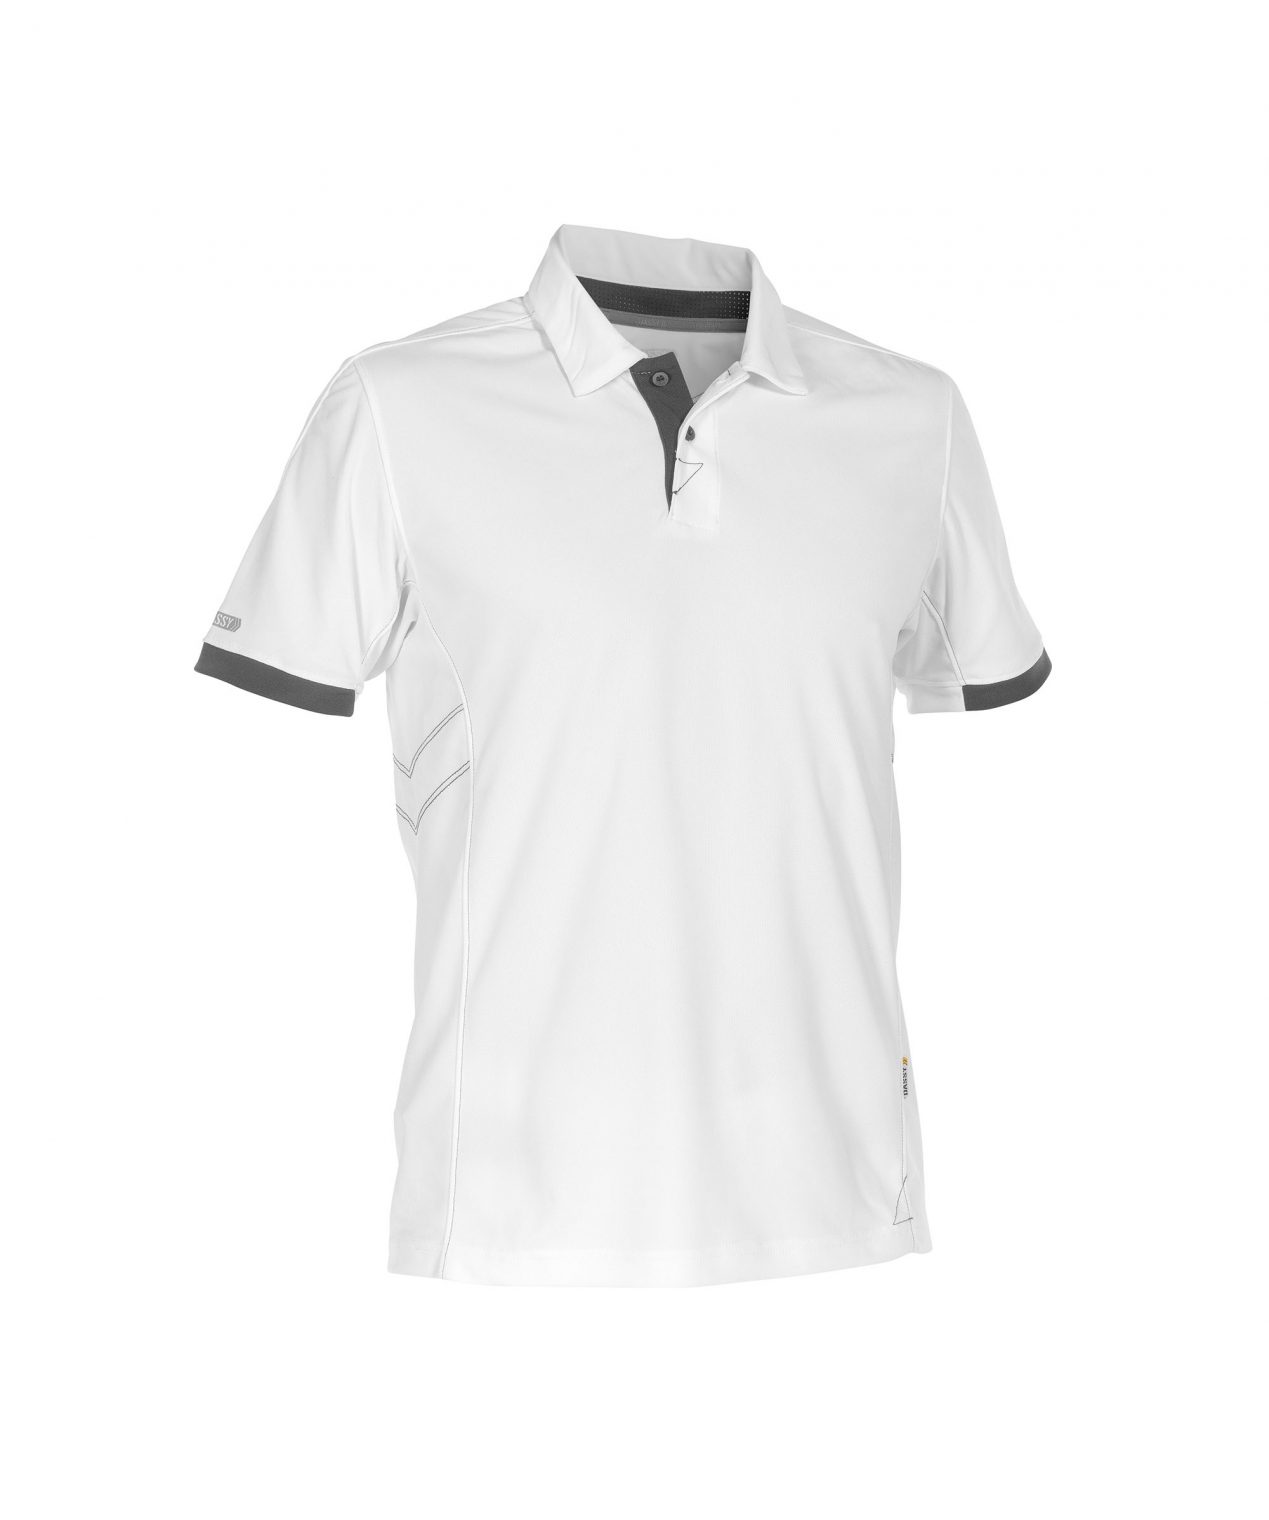 traxion polo shirt white anthracite grey front